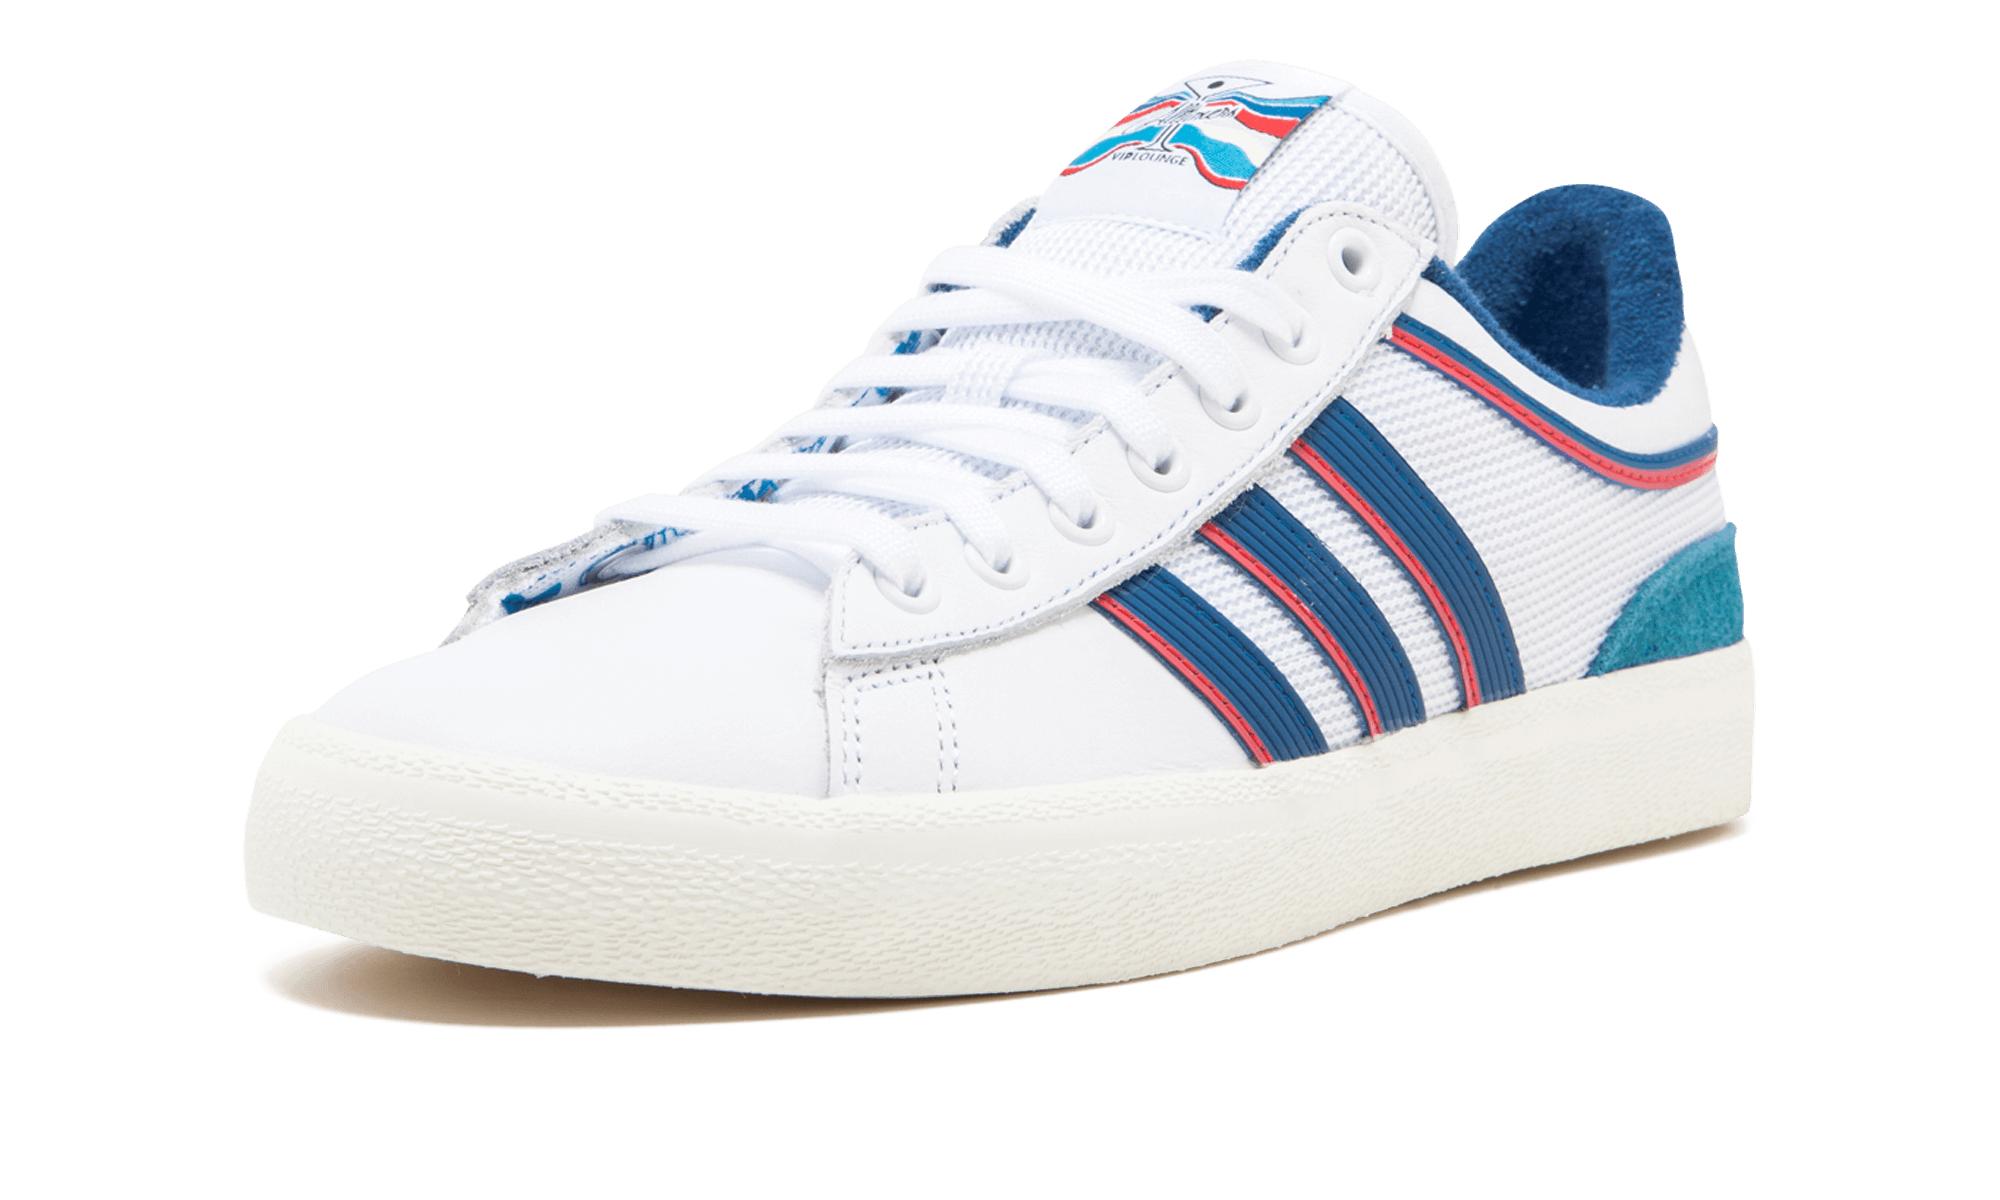 adidas Campus Vulc X Alltimers in 9.5 (Blue) for Men - Lyst